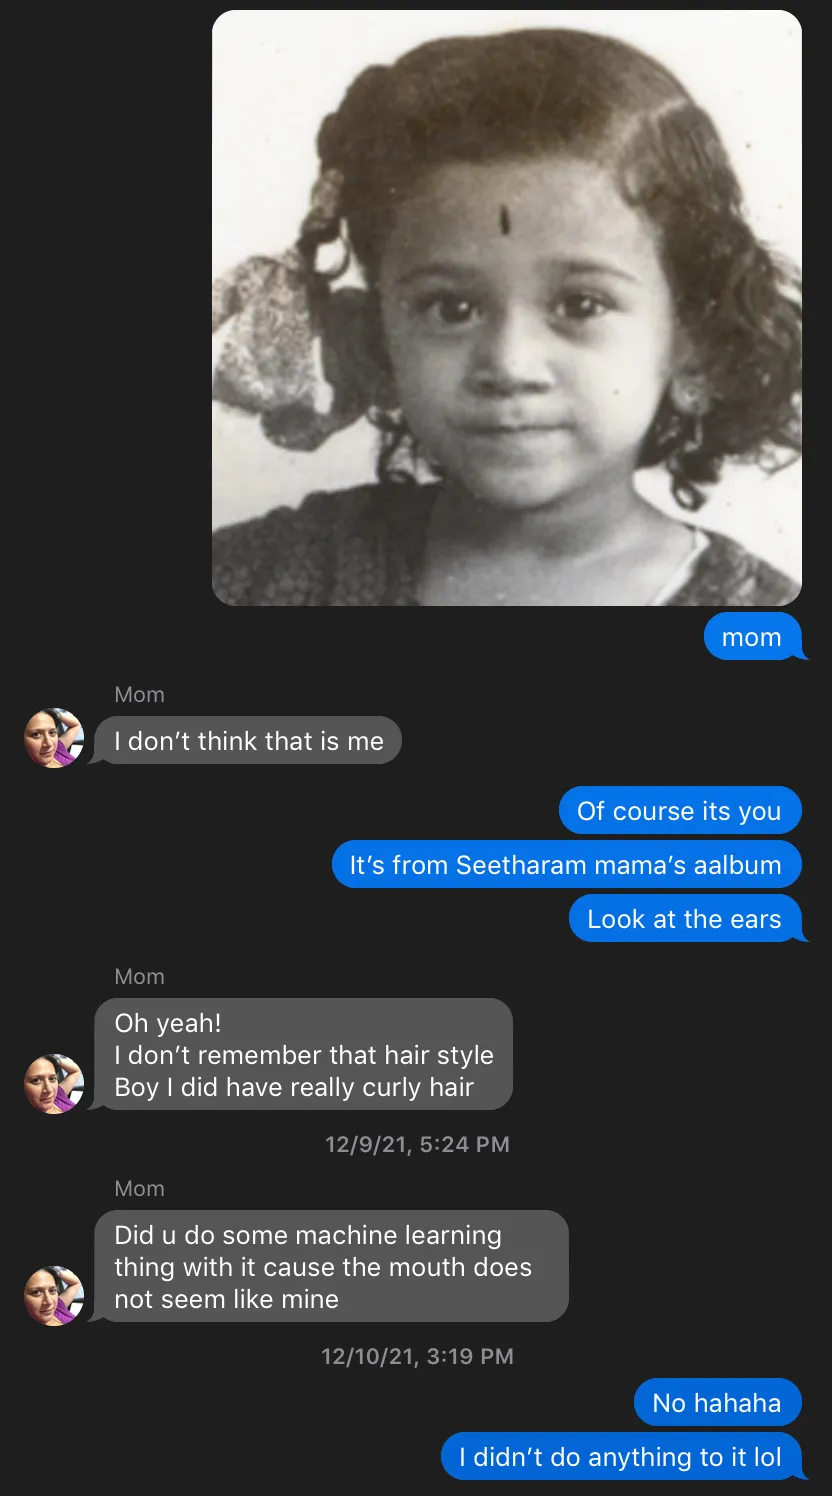 A screenshot of a text conversation with my mom where she doesn’t recognize a baby photograph of herself and asks if I generated or manipulated the image.